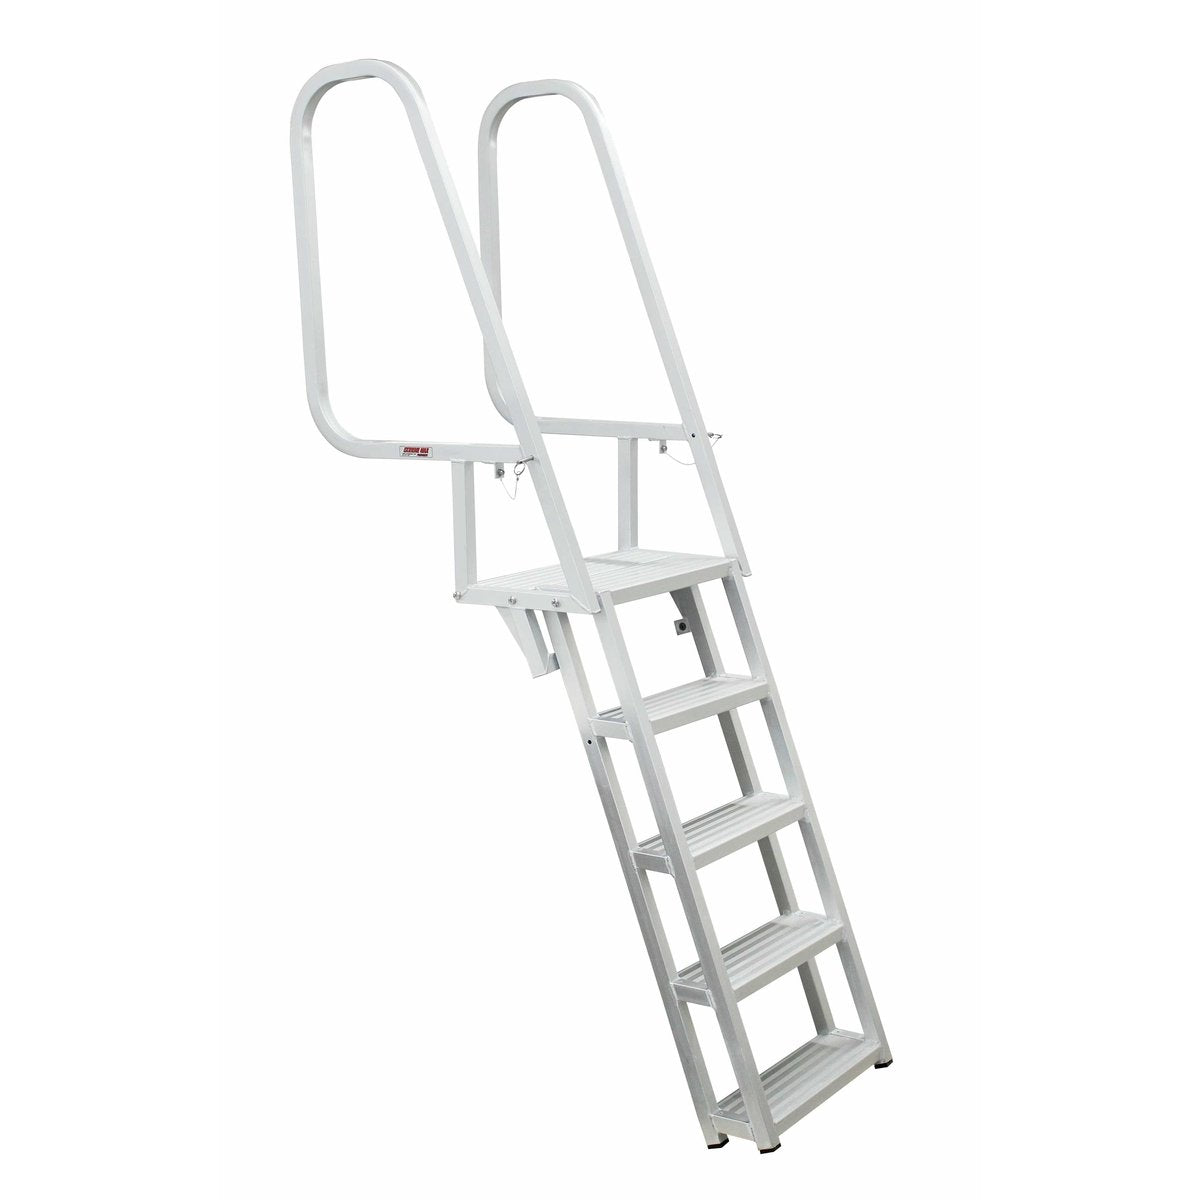 Extreme Max Deluxe Flip-Up Dock Ladder with Welded 5-Step #3005.3916